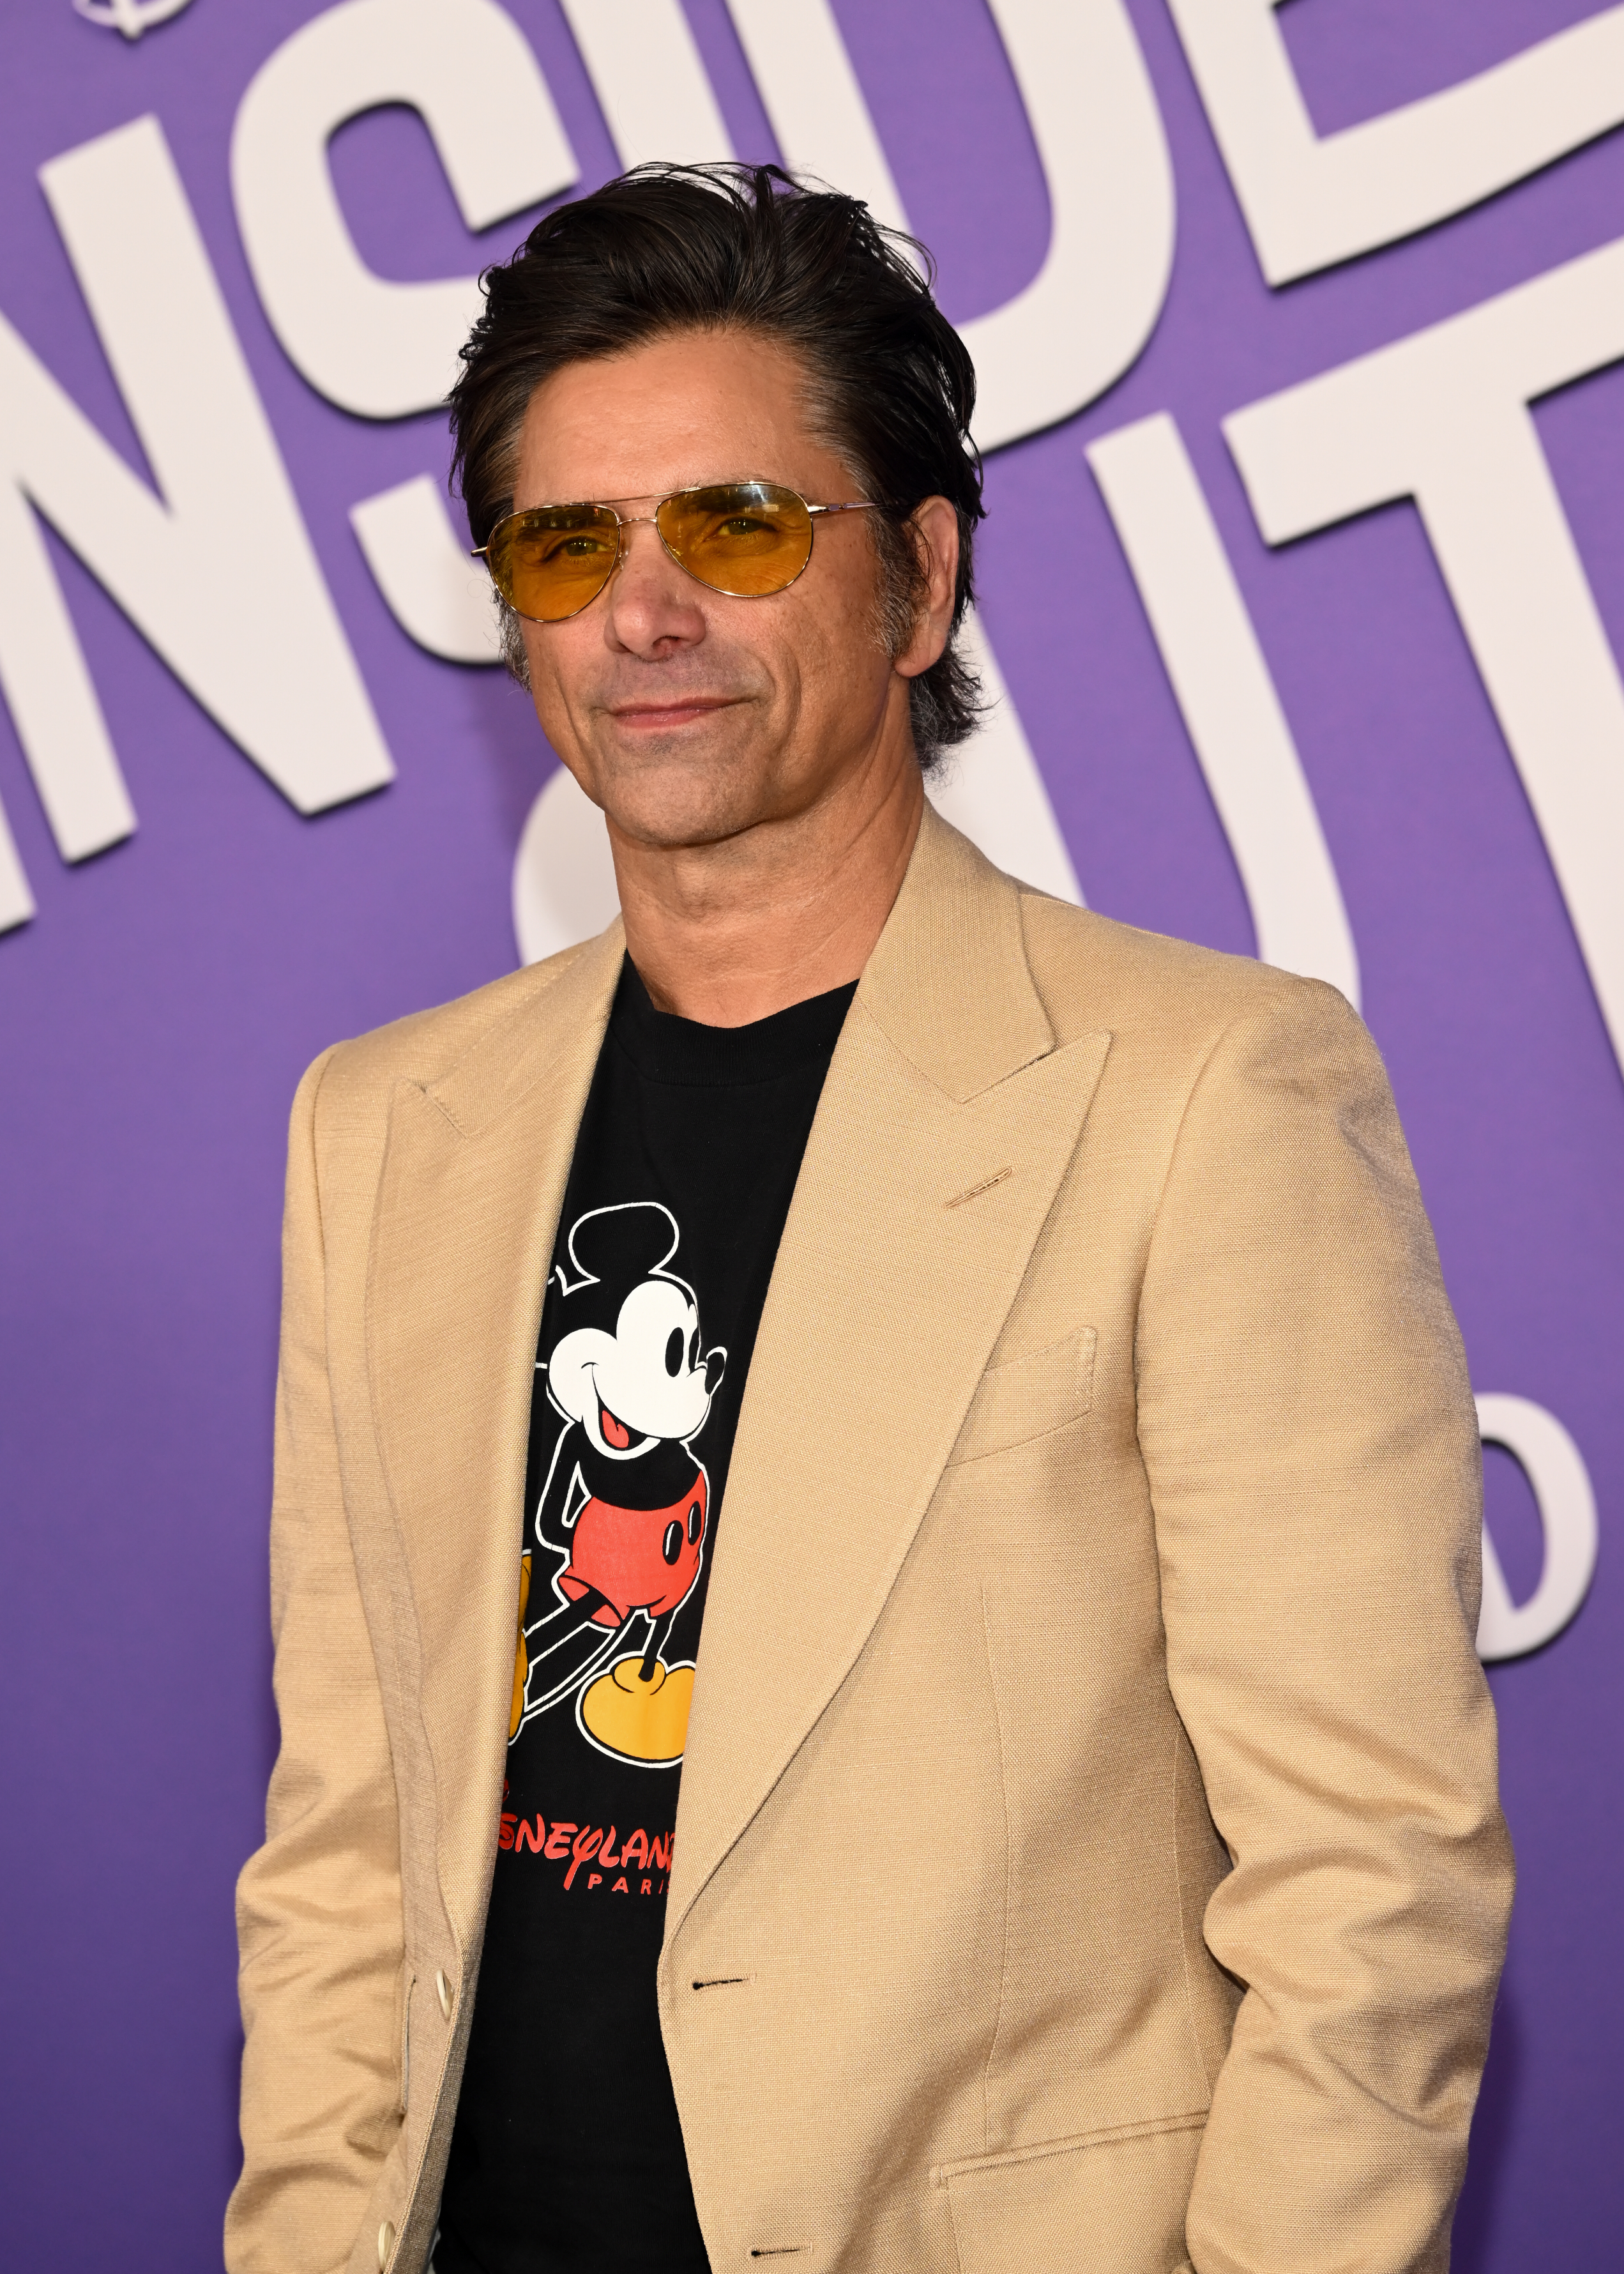 John Stamos wearing a Mickey Mouse T-shirt and beige blazer, attending a celebrity event in front of a large purple &quot;Inside Out&quot; sign